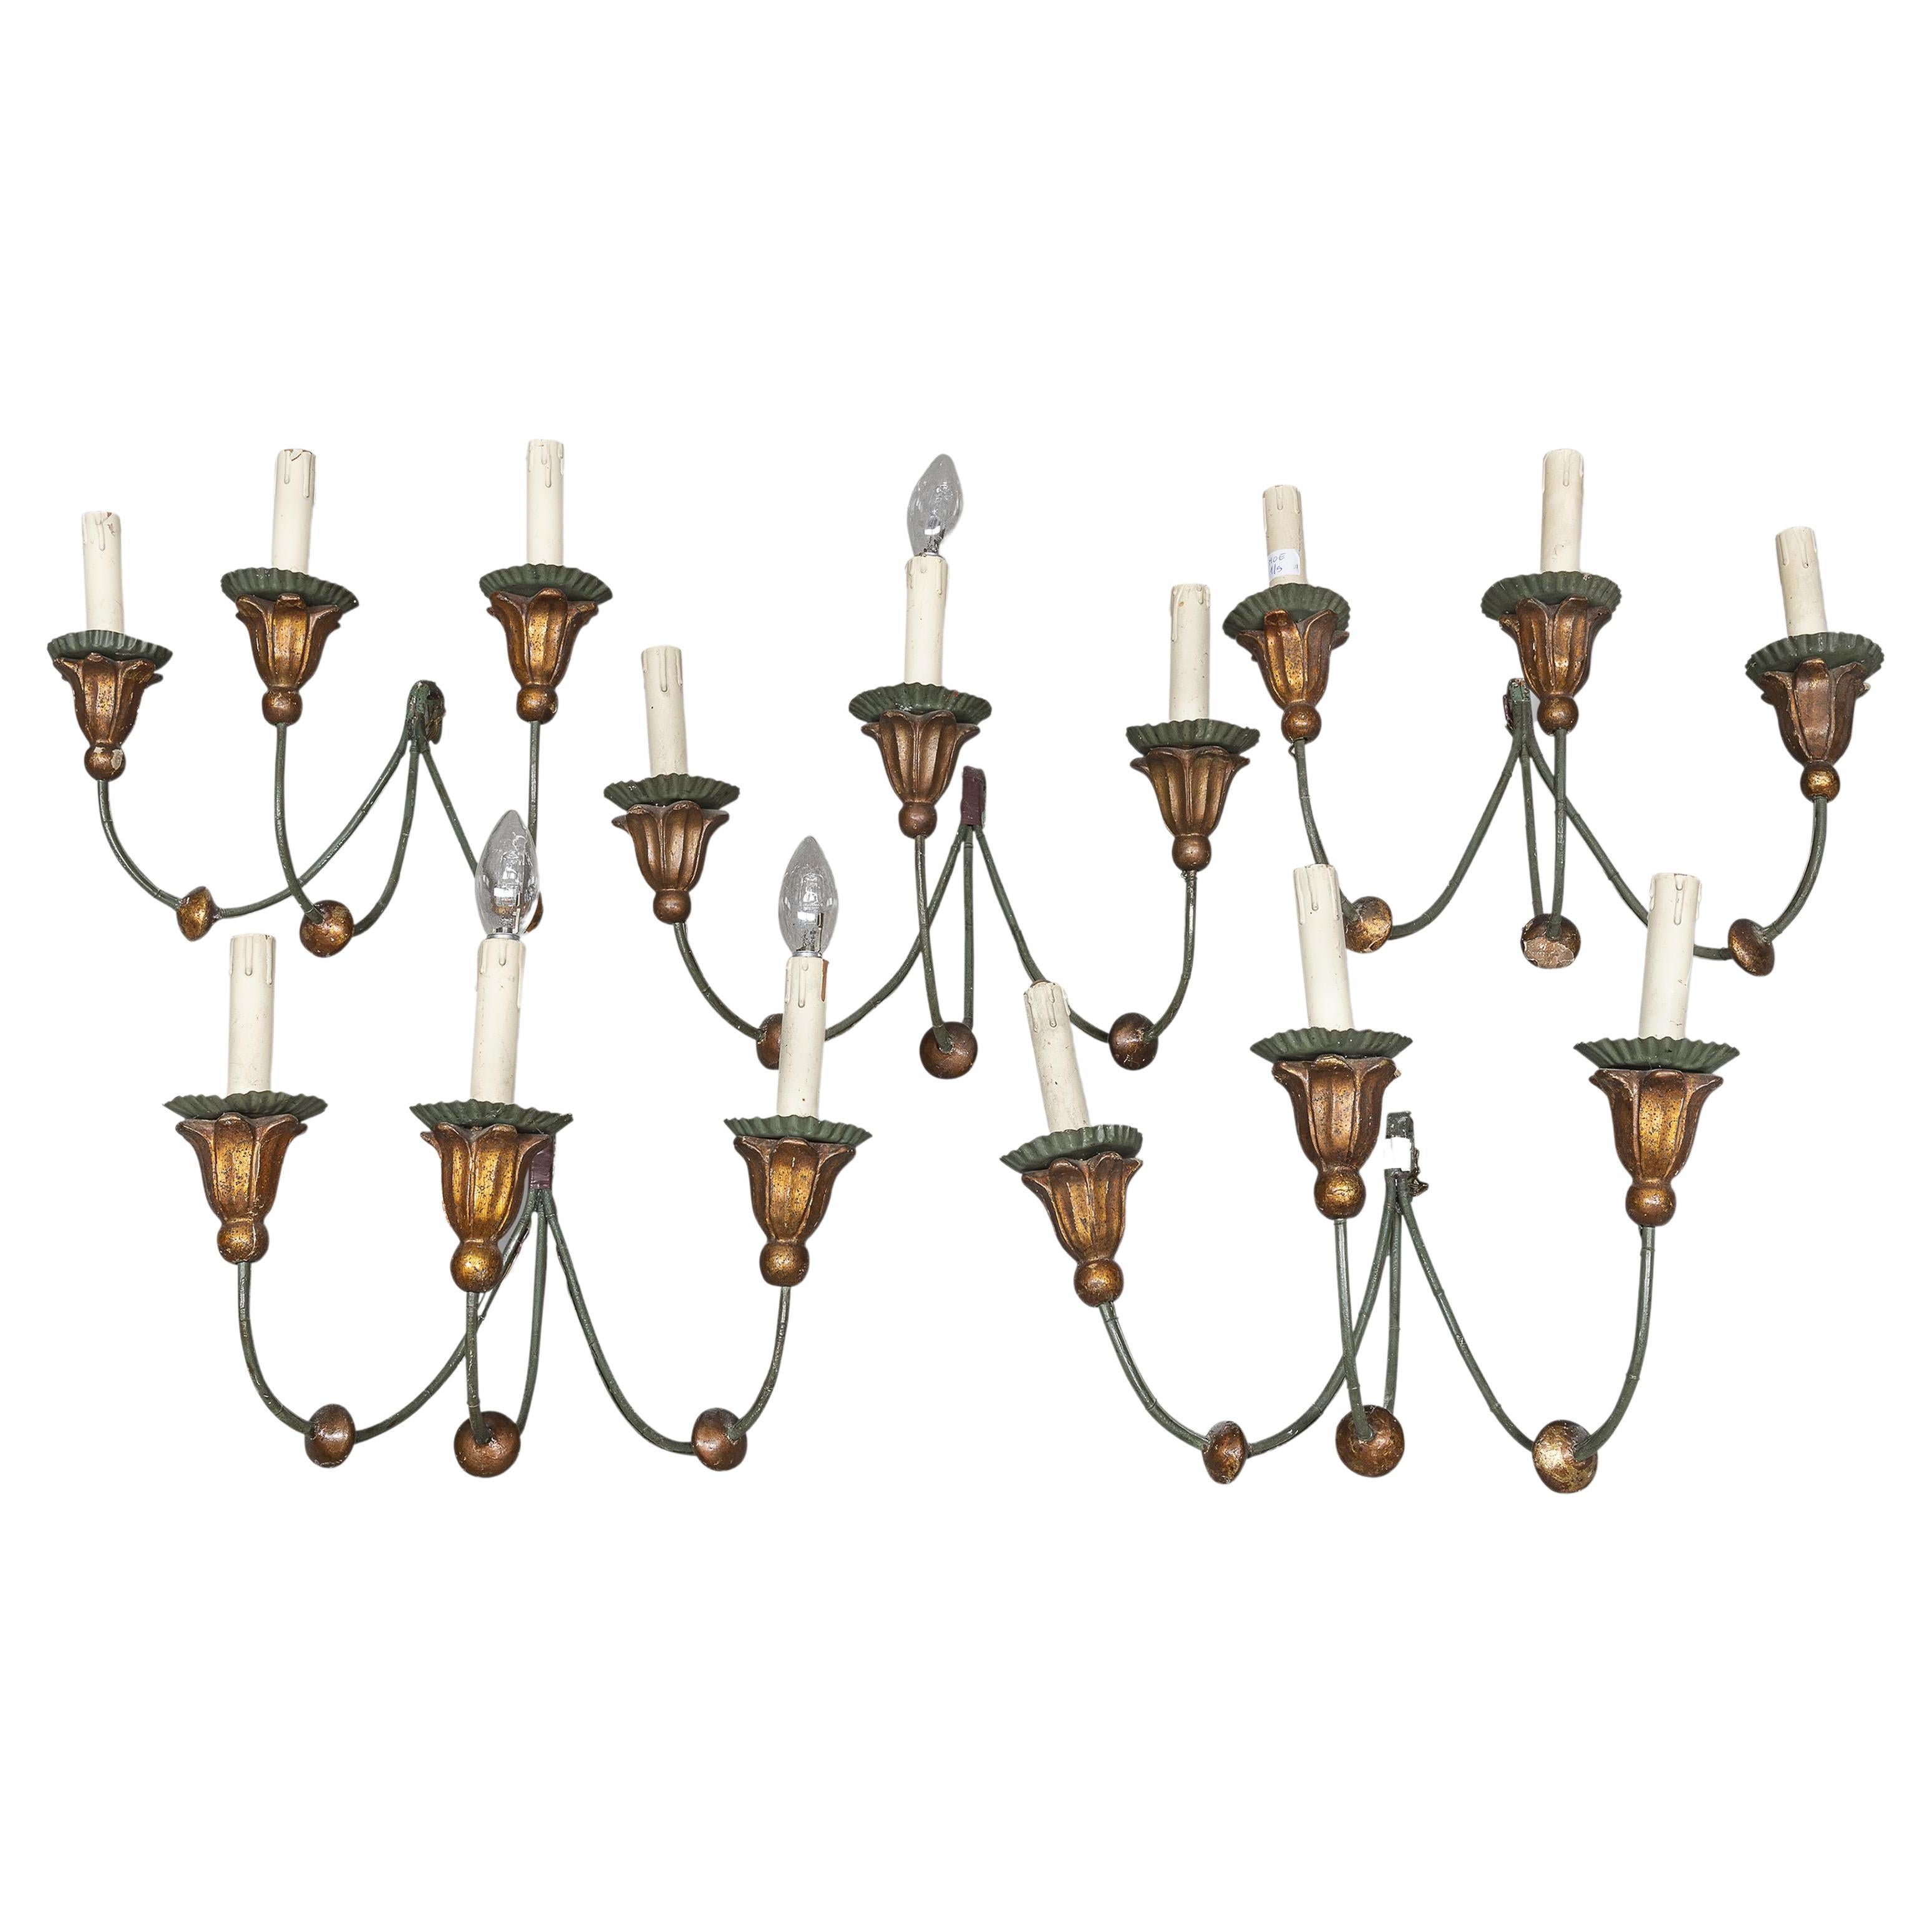 A Group of Five 19th century 3-light antique European Wall Sconces For Sale